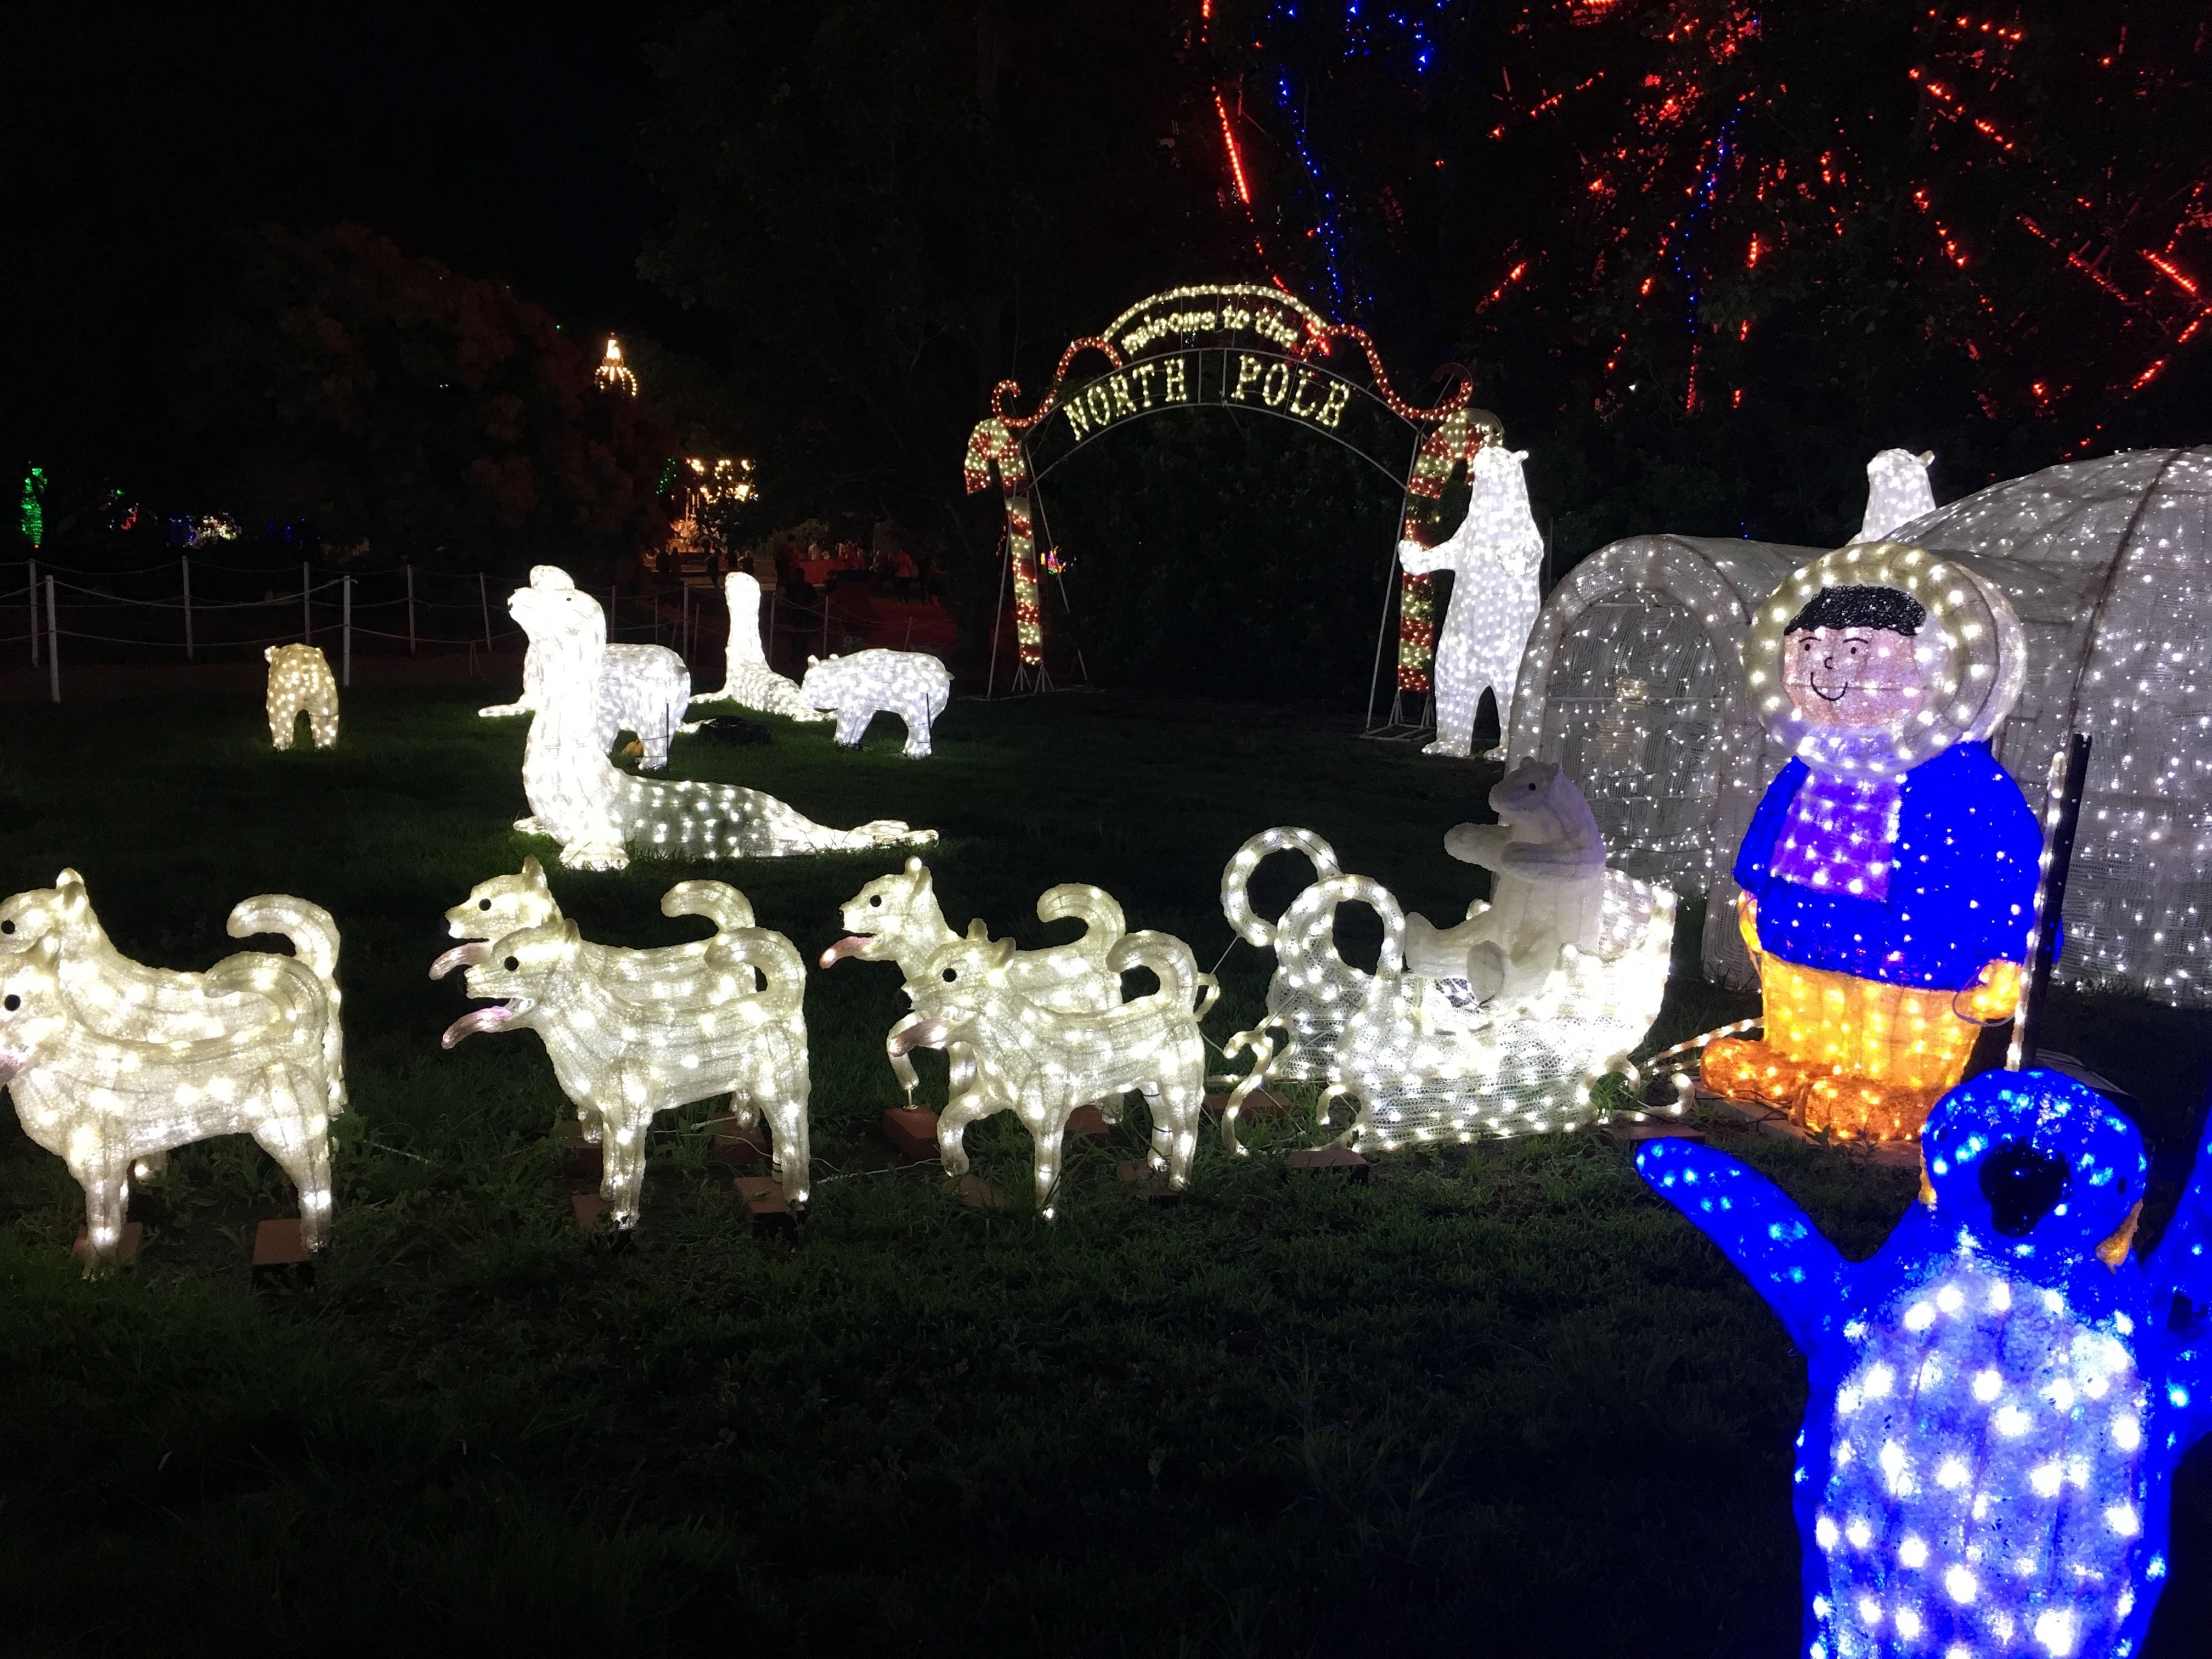 Hunter Valley Gardens Christmas Lights 2018-2019 Public Day Night Tour Image -5c149f613824a